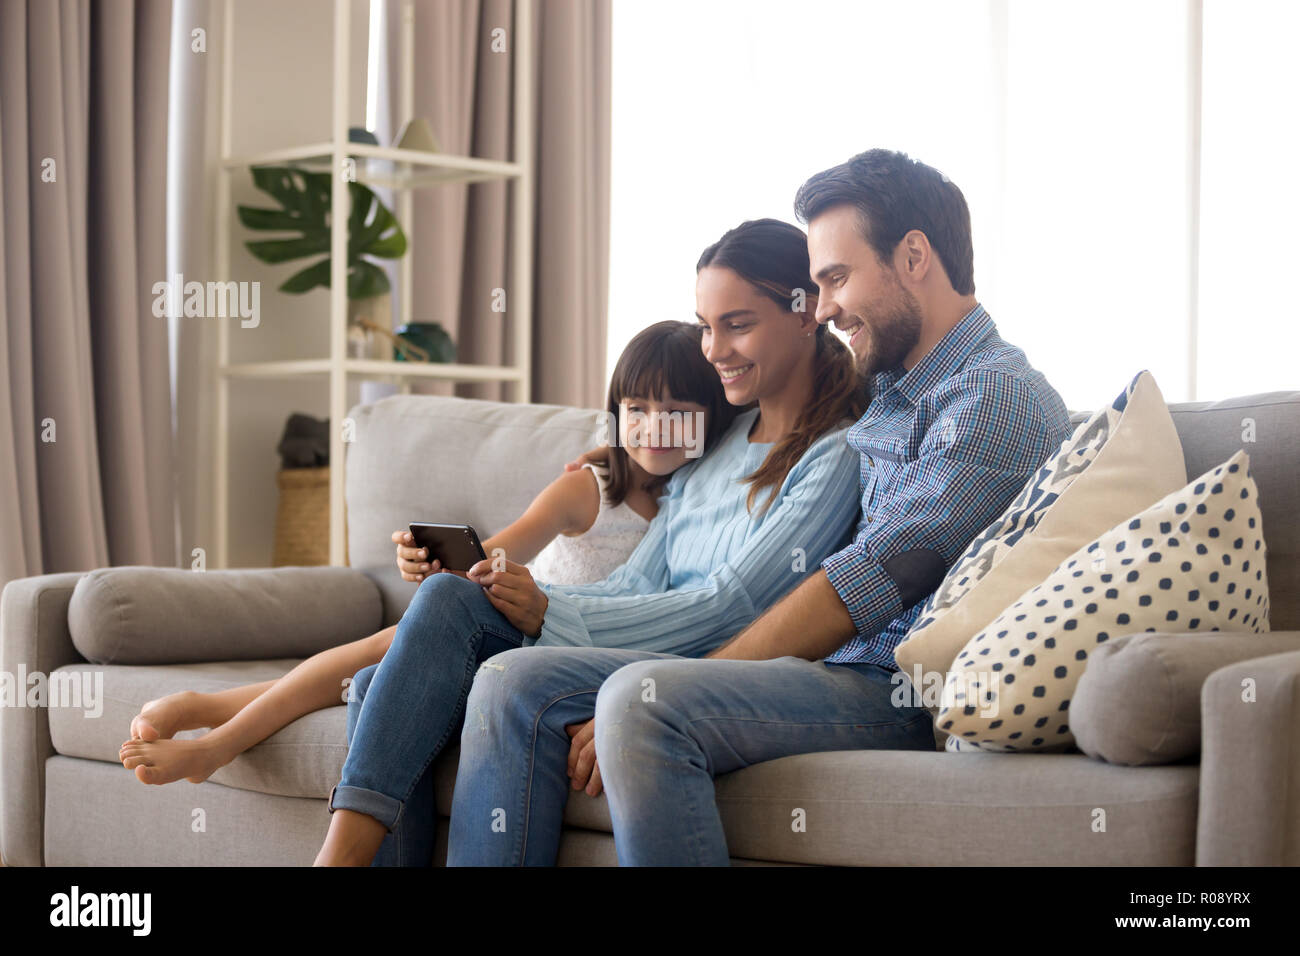 Family spend free time watching cartoons on mobile phone Stock Photo